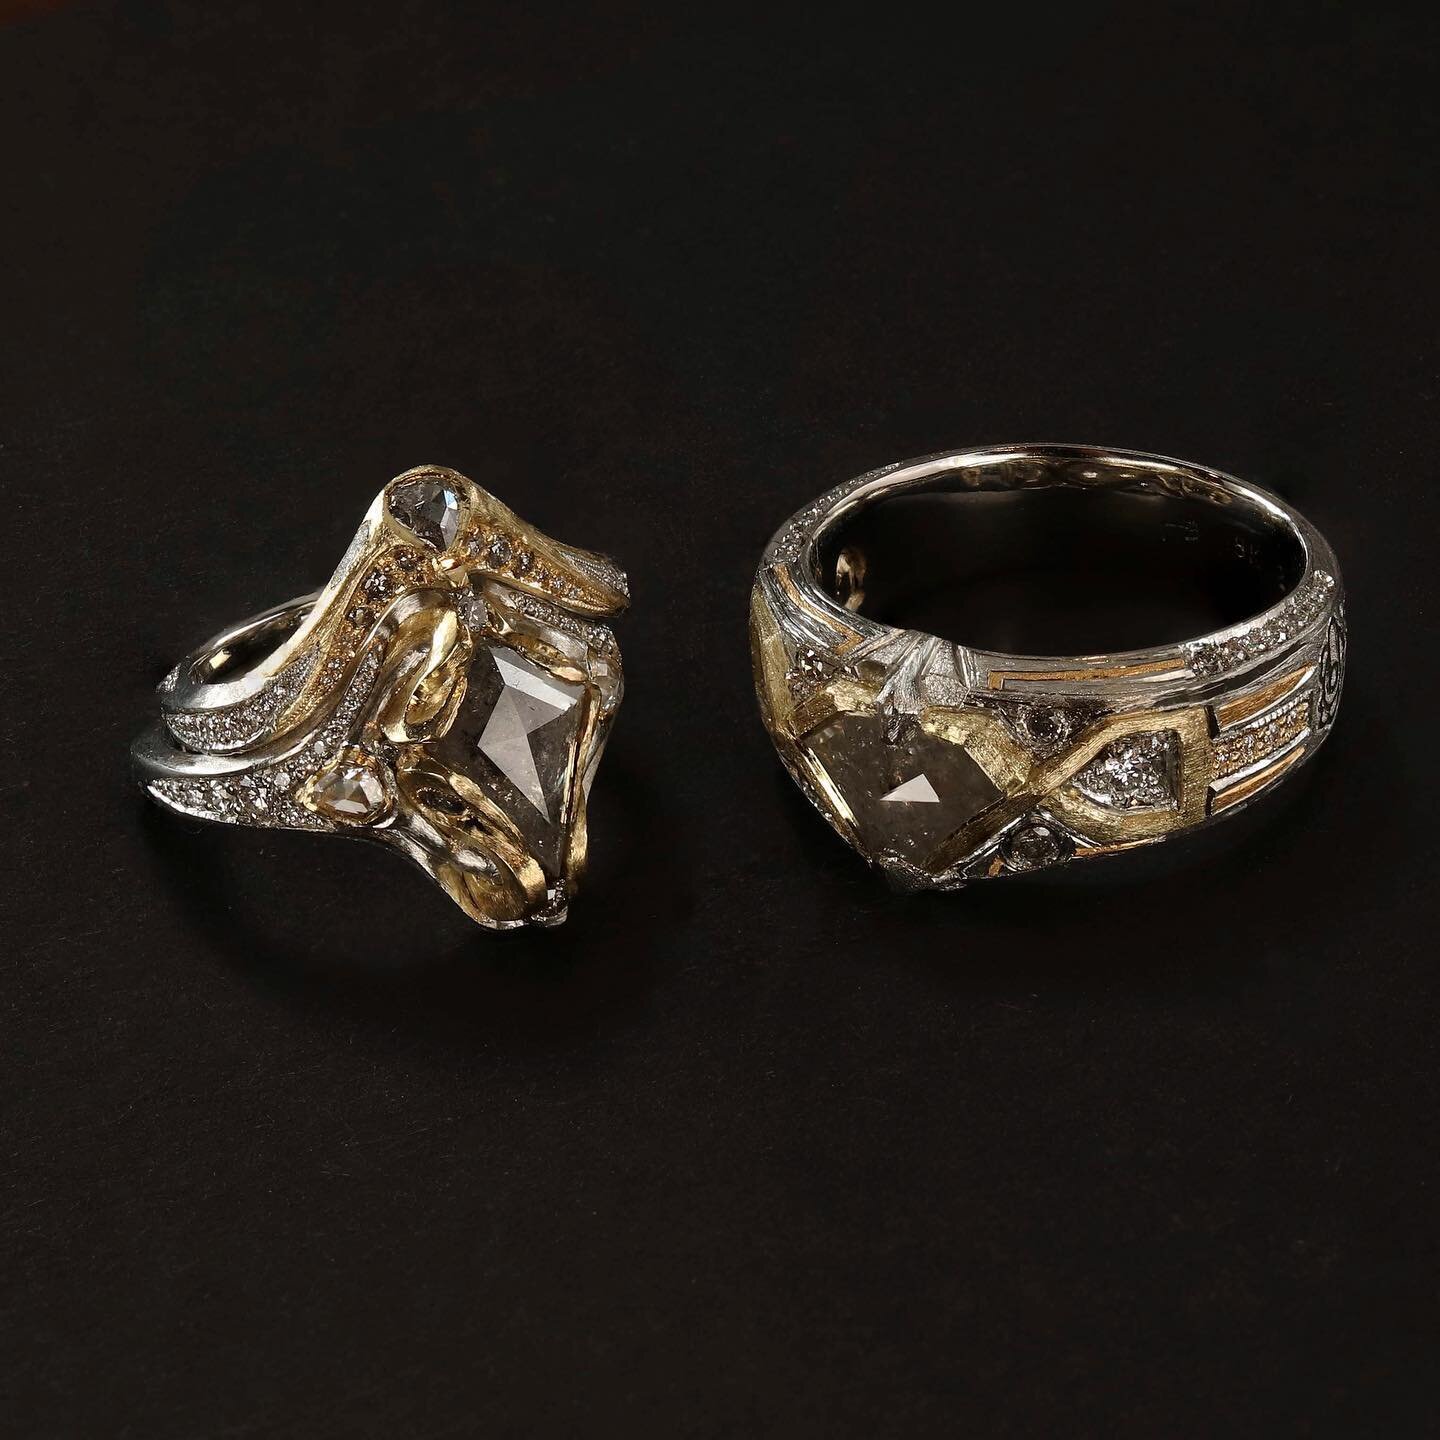 So happy to share these special bi-metal cast rings! These were very special engagement and wedding rings for some dear friends.  They were cast in 18k yellow gold with 18k white gold cast around that. The both feature salt and pepper diamonds along 